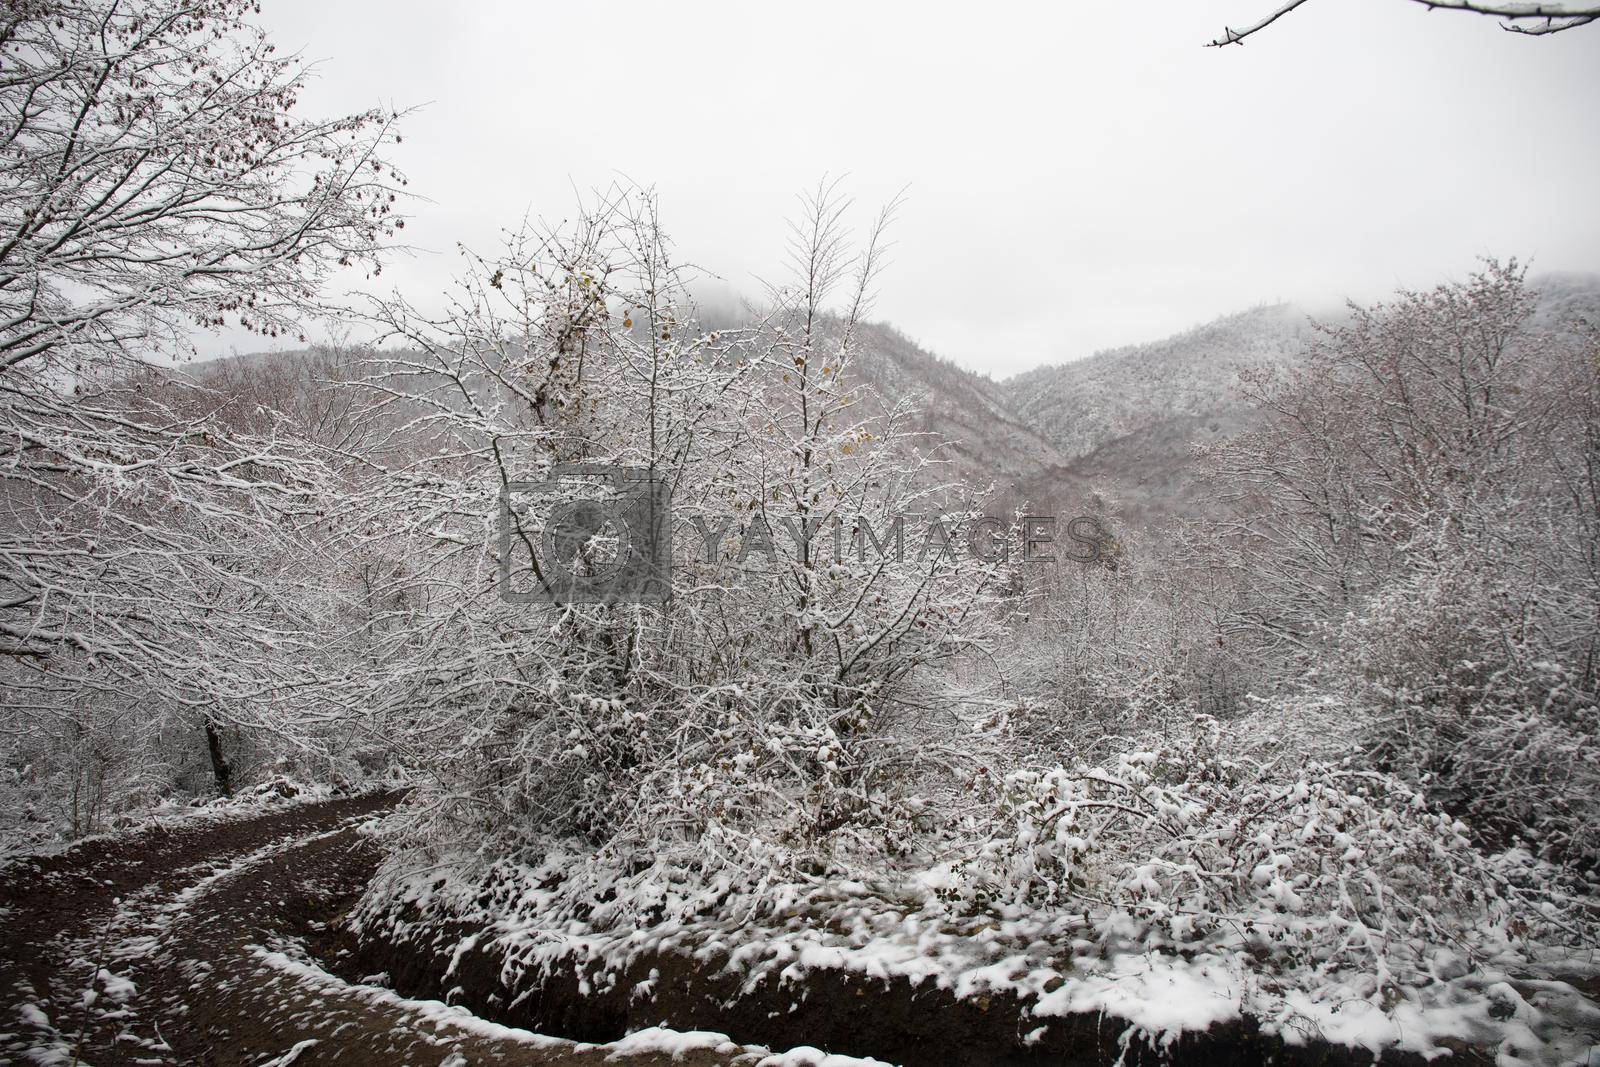 Winter trees in mountains covered with fresh snow. Beautiful foggy landscape with branches of trees covered in snow. Mountain road in Caucasus. Azerbaijan